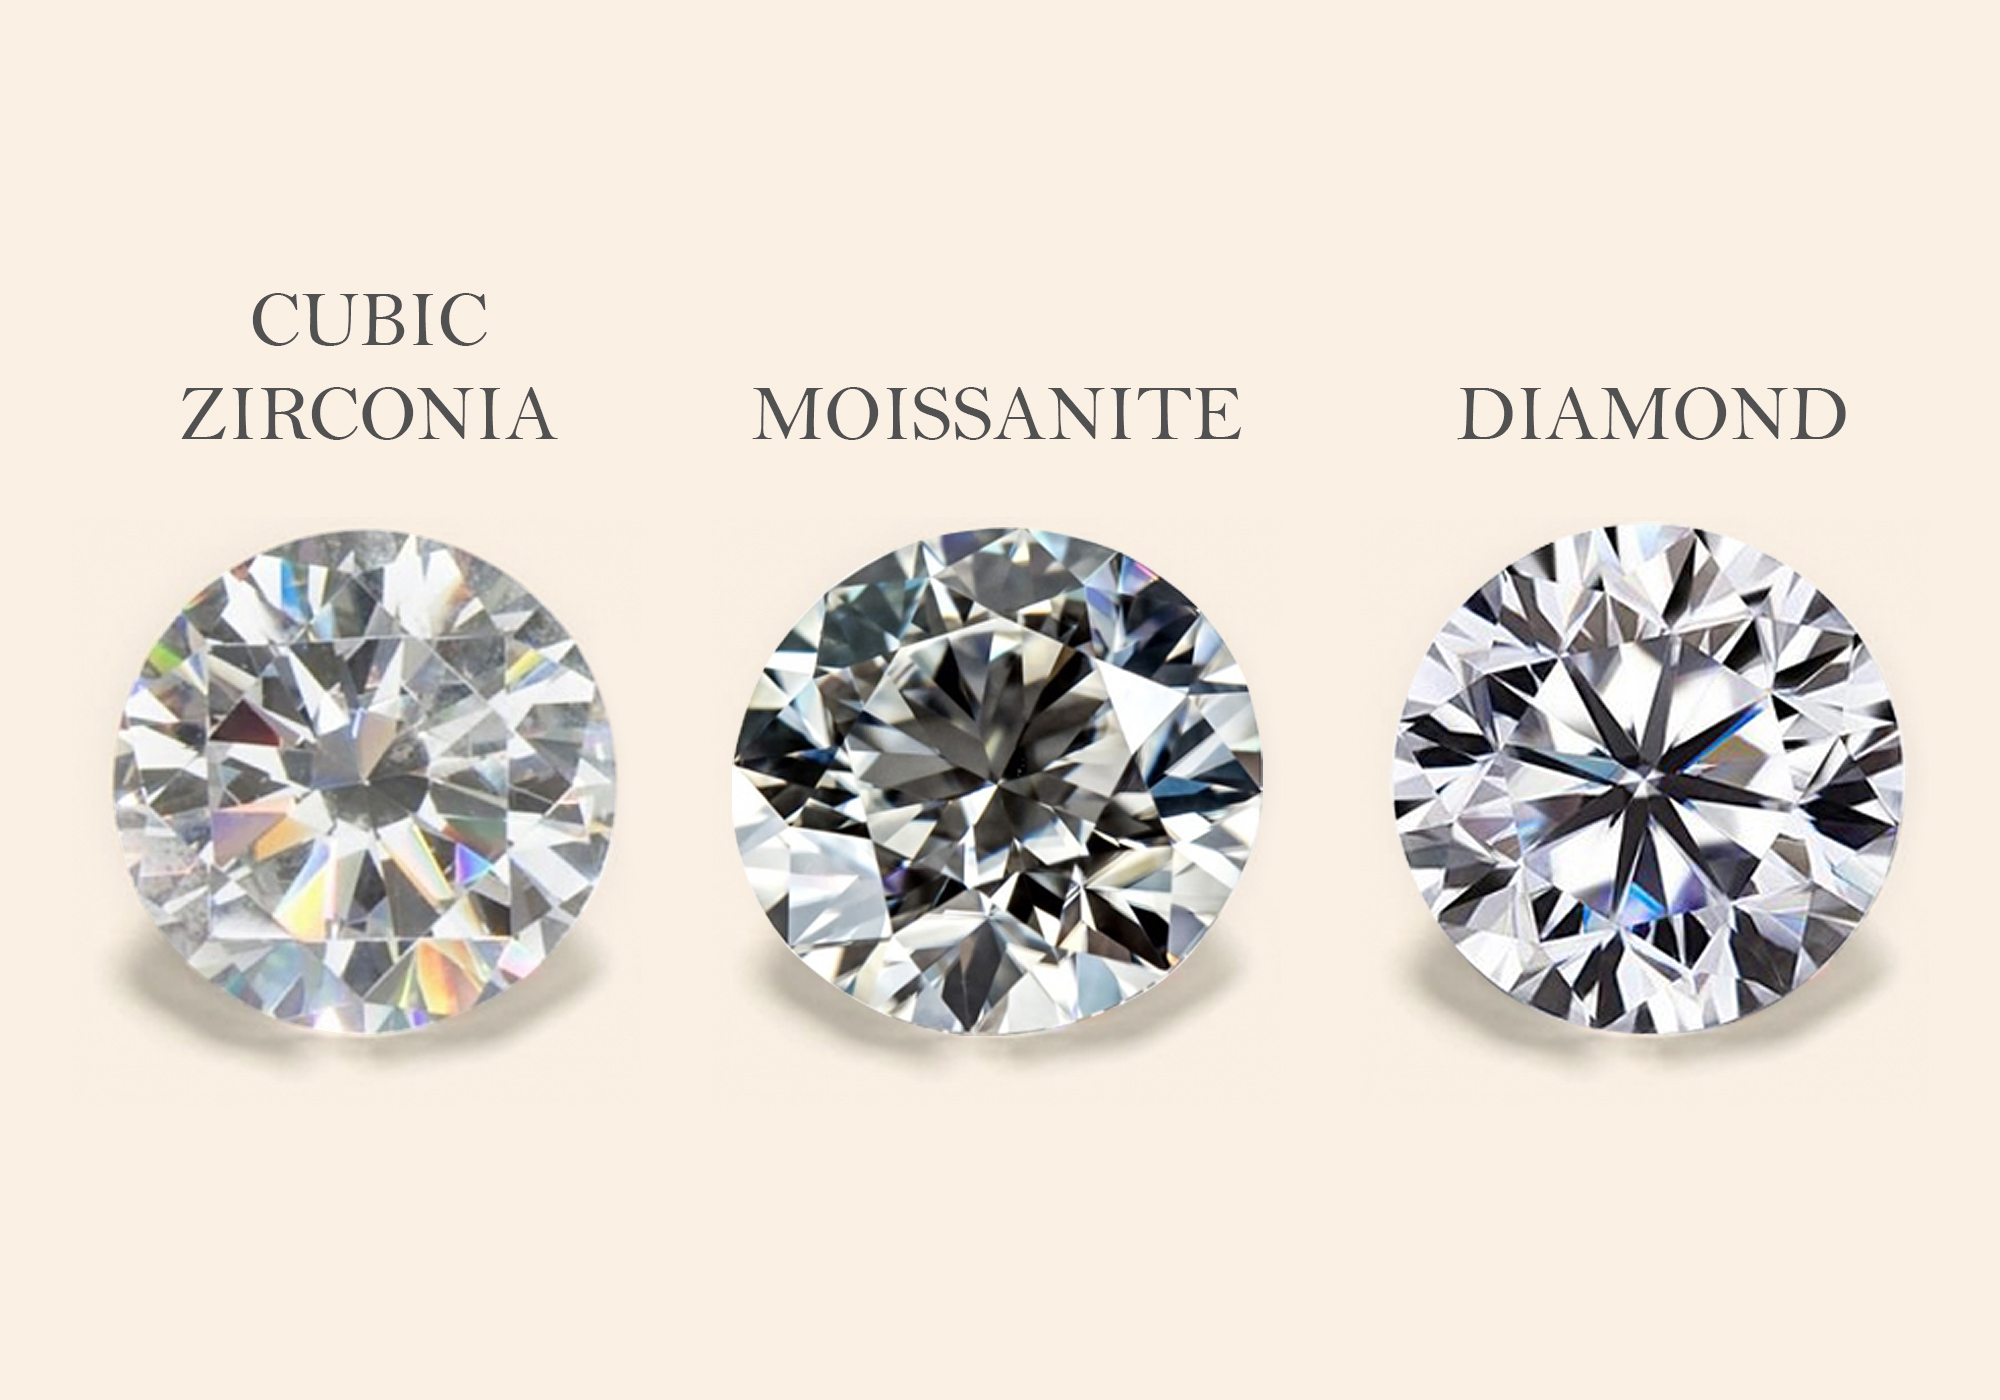 Are lab grown diamonds the same as moissanite or cubic zirconia